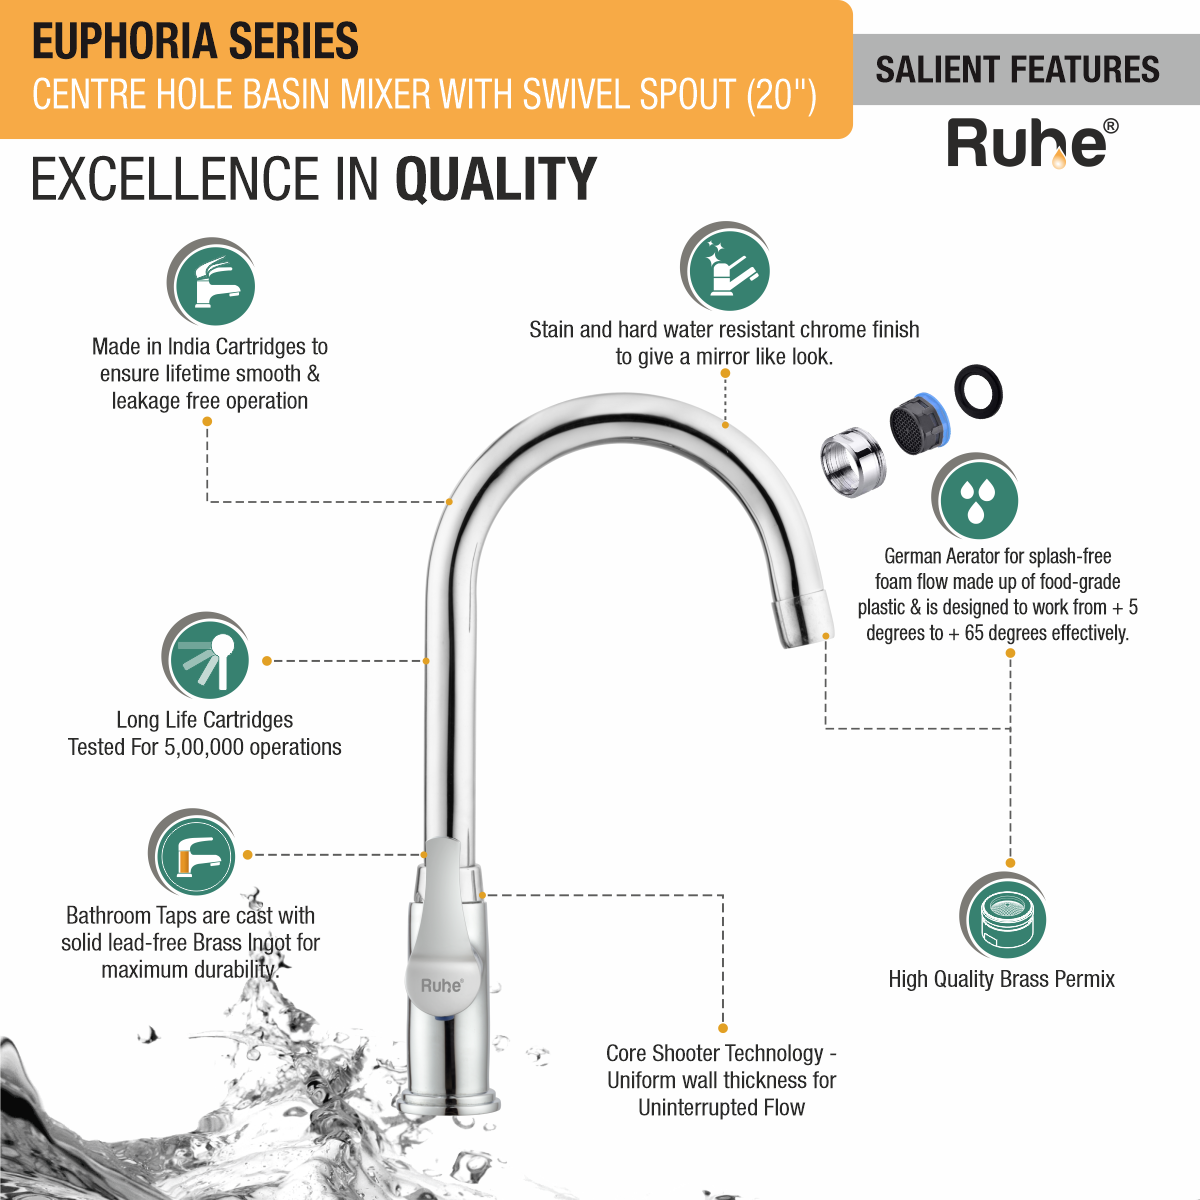 Euphoria Centre Hole Basin Mixer with Large (20 inches) Round Swivel Spout Faucet features